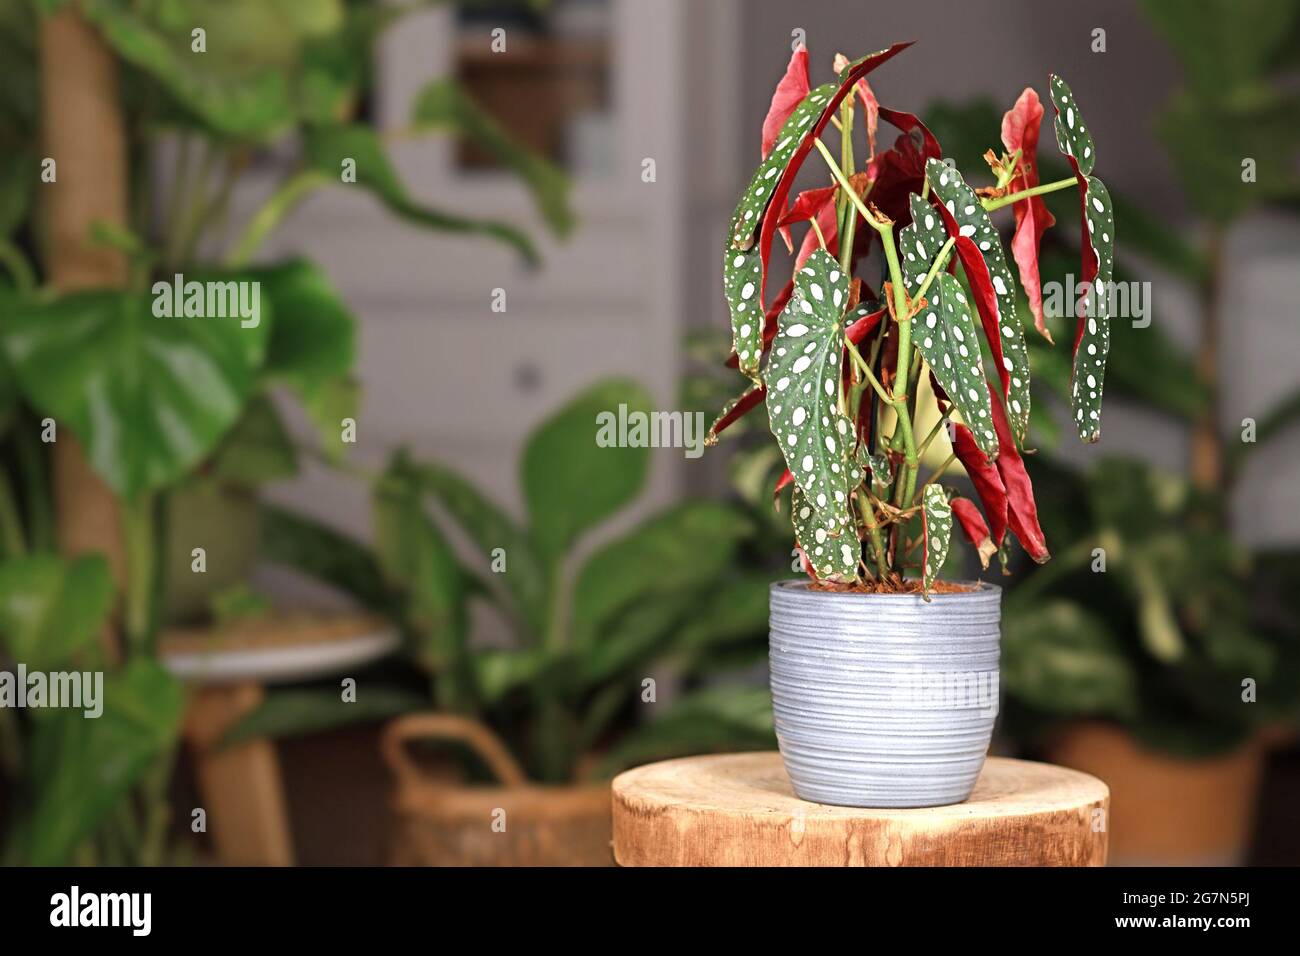 Exotic 'Begonia Maculata' houseplant with white dots in gray ceramic flower pot on wooden plant stand with more plants in blurry background Stock Photo